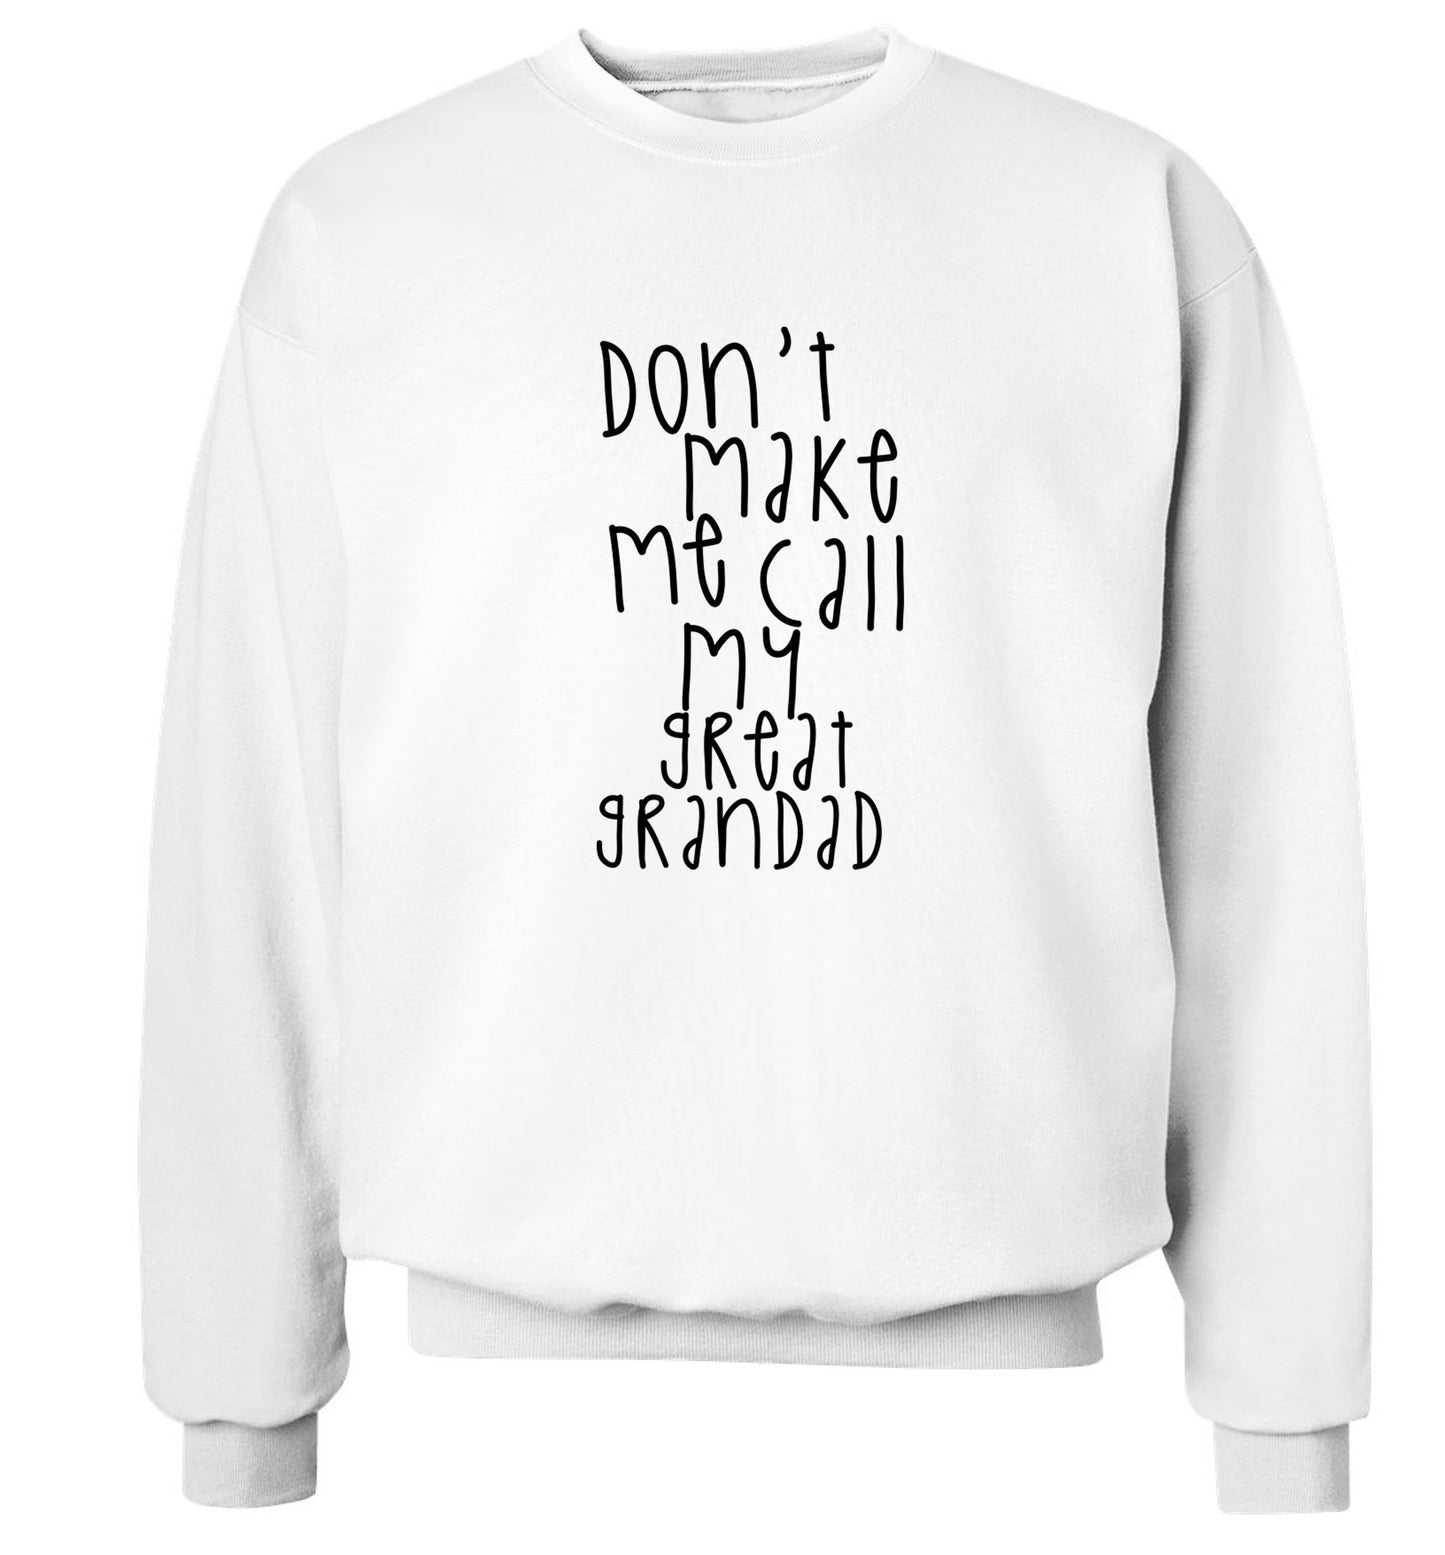 Don't make me call my great grandad Adult's unisex white Sweater 2XL